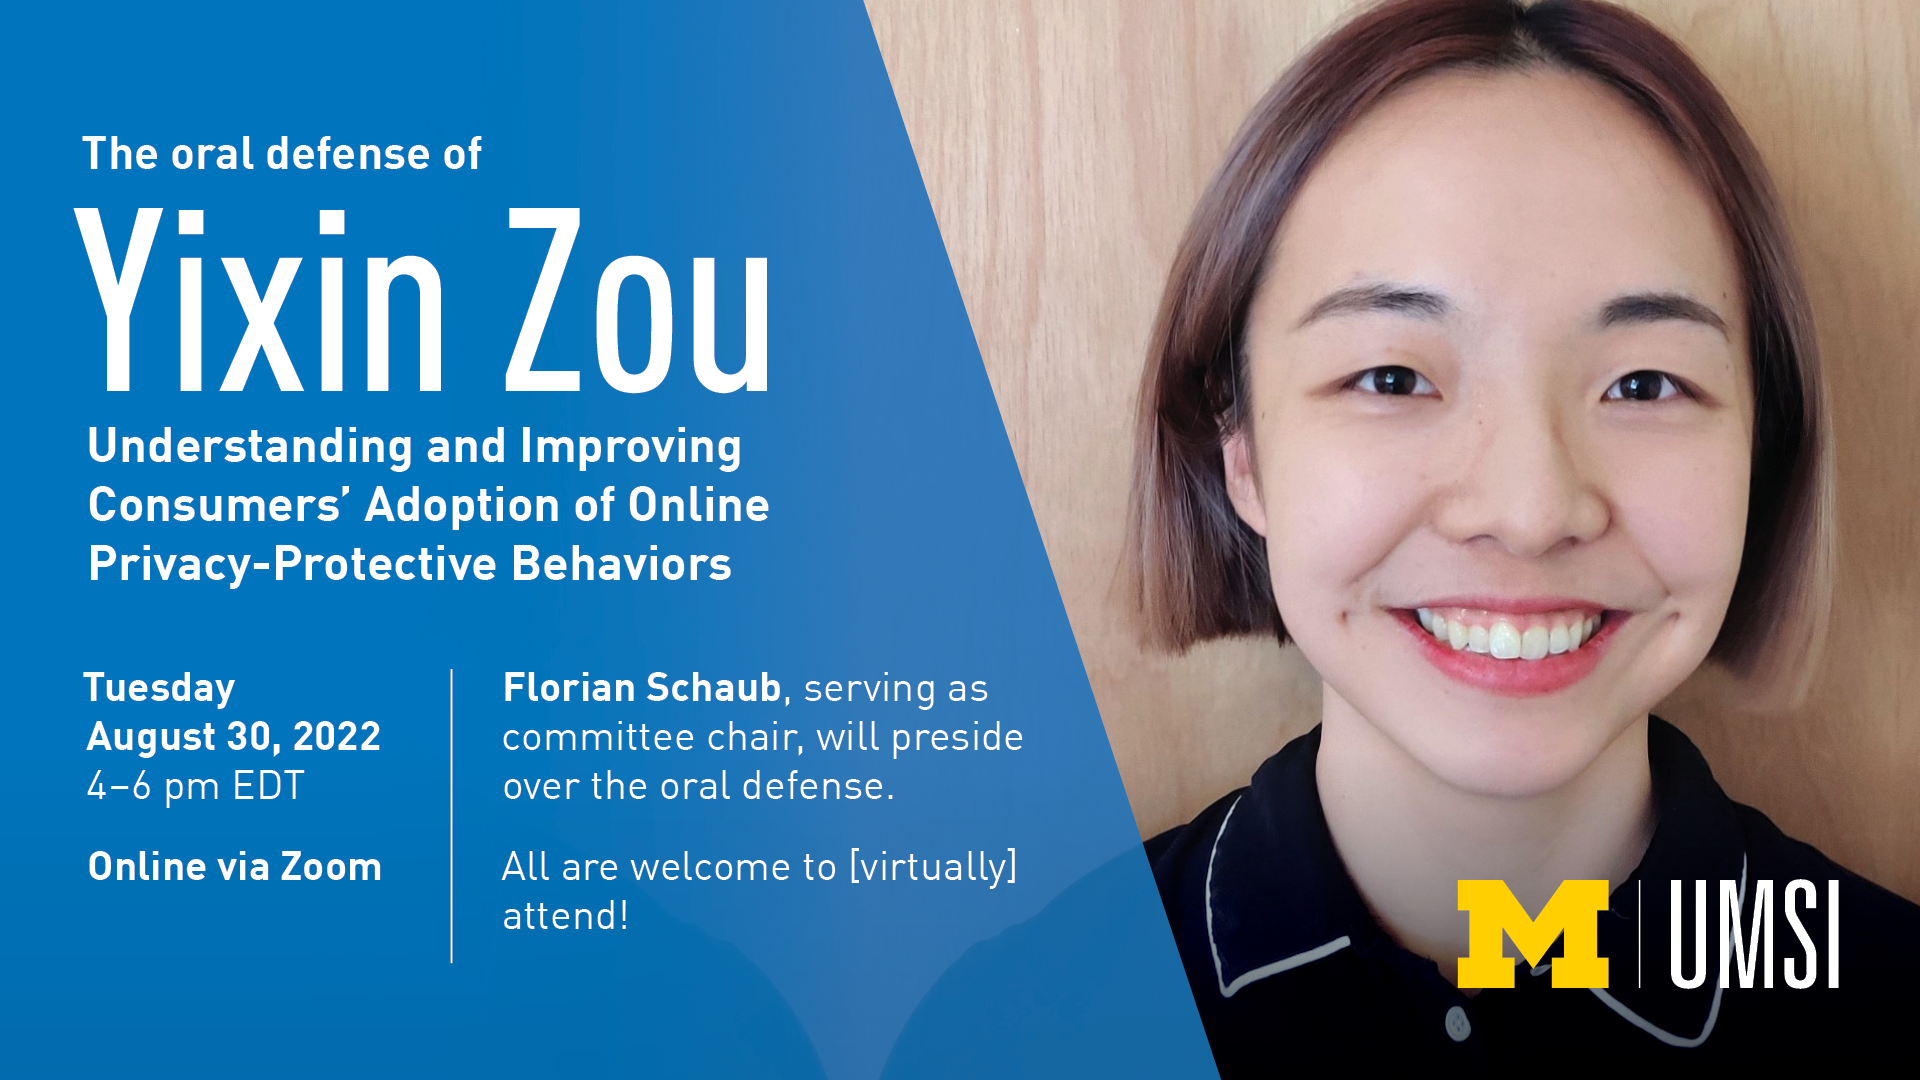 “The oral defense of Yixin Zou. Understanding and Improving Consumers’ Adoption of Online Privacy-Protective Behaviors.” Tuesday, August 30, 2022. 4-6 pm EDT. Online via Zoom. Florian Schaub, serving as committee chair, will preside over the oral defense. All are welcome to [virtually] attend!” 